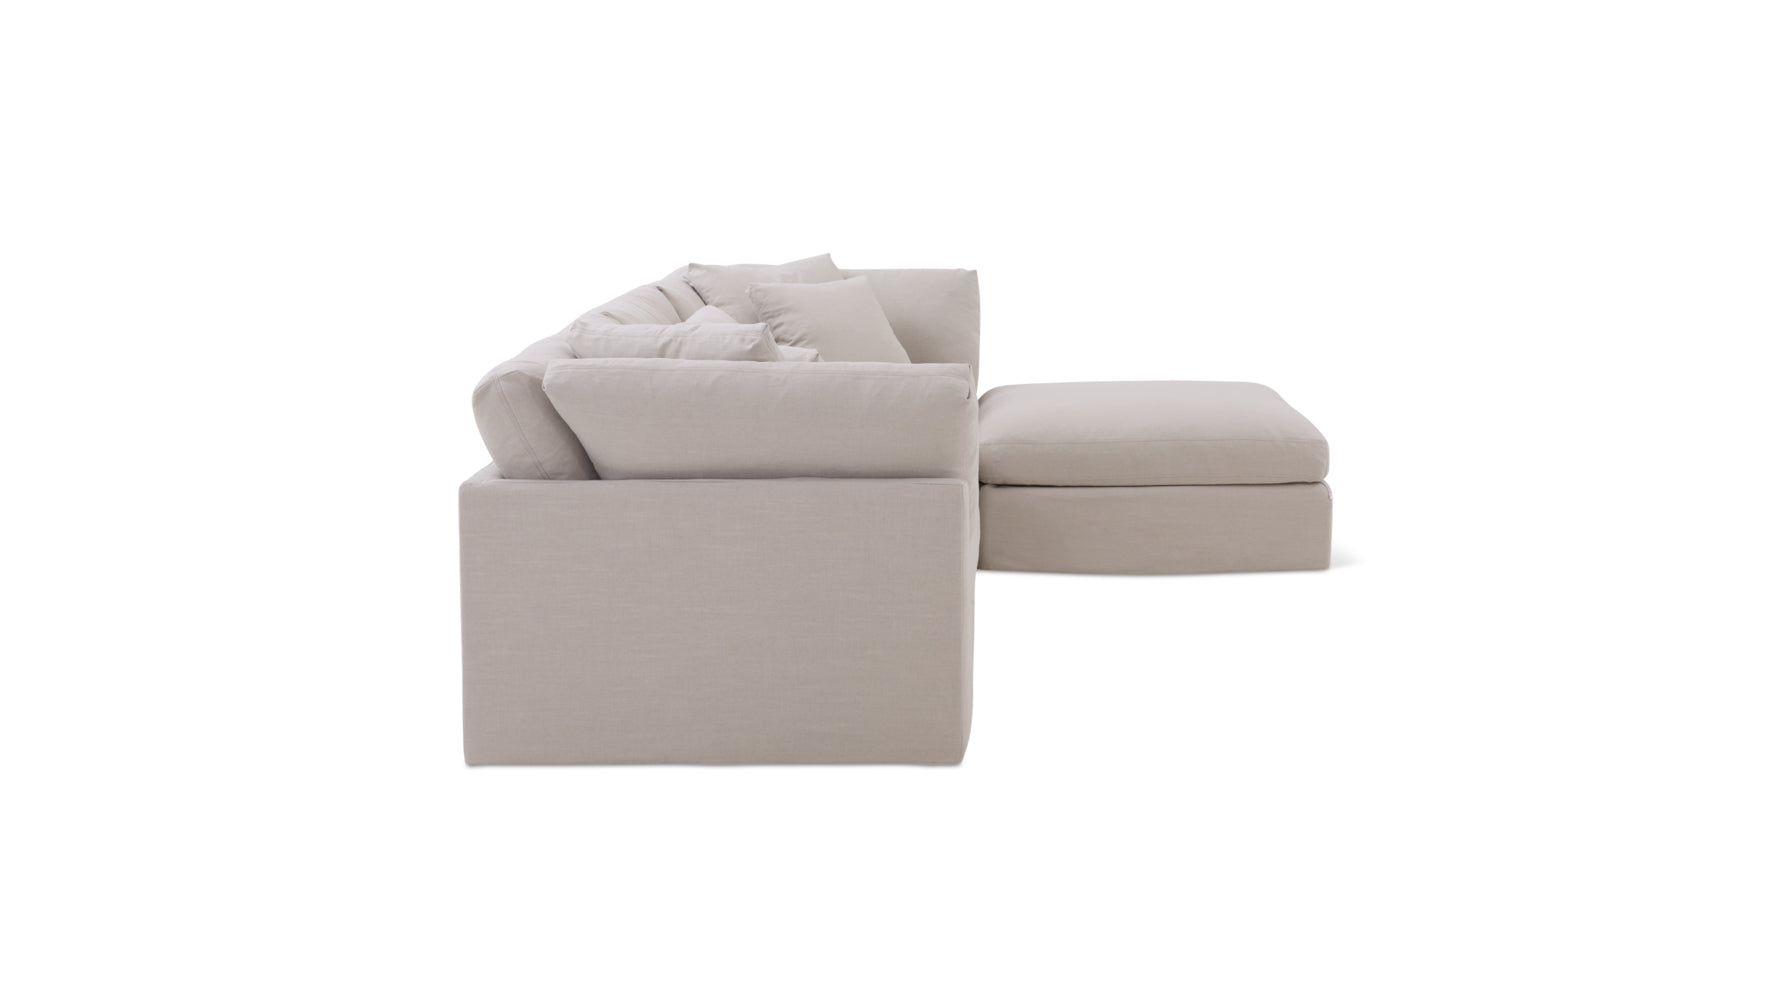 Get Together™ 4-Piece Modular Sectional, Large, Clay - Image 6